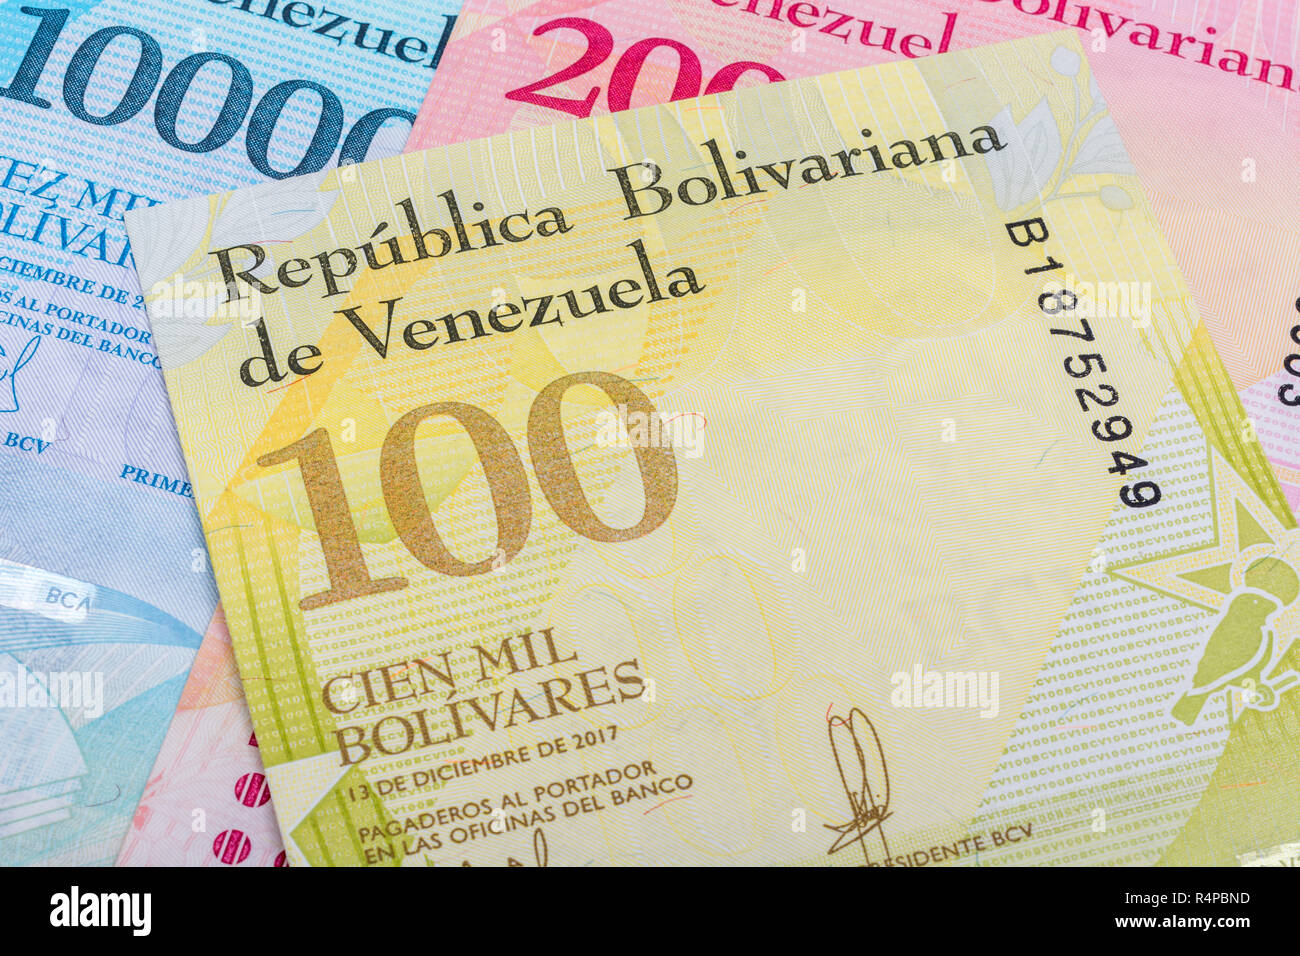 Venezuela Bolivar banknotes - metaphor for Hyperinflation in the Venezuelan economy, where banknotes are almost worthless. SEE ADDIT. NOTES Stock Photo